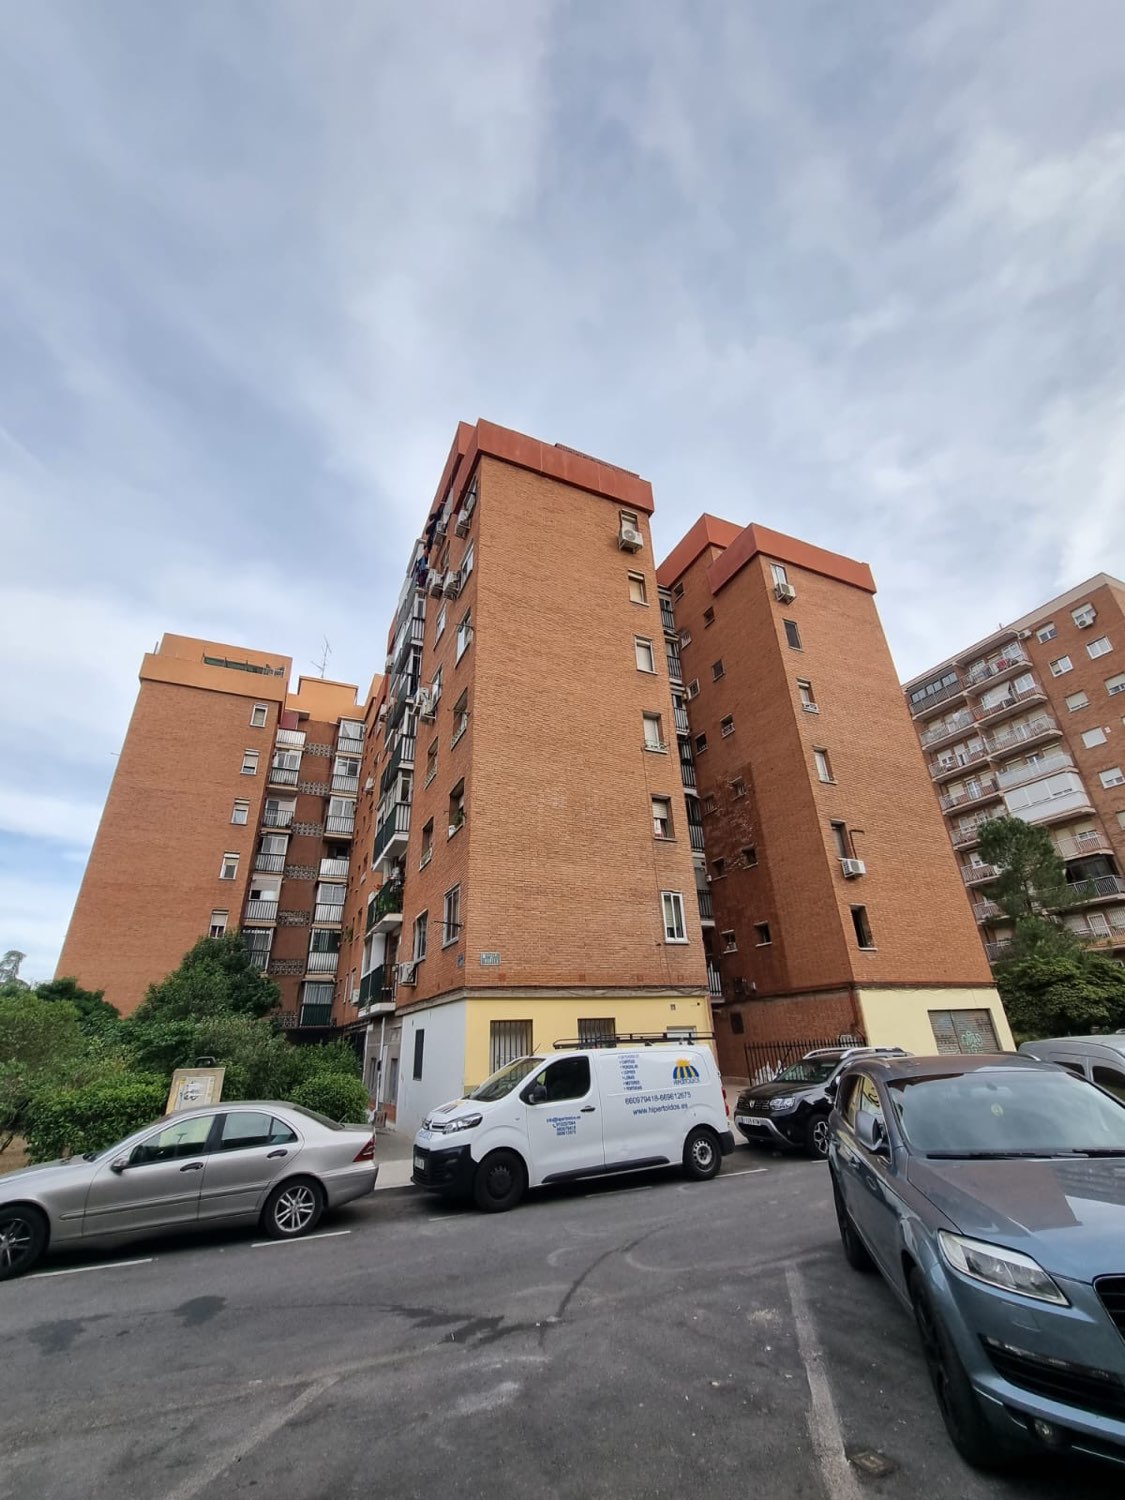 Flat for sale in Entrevías (Madrid)